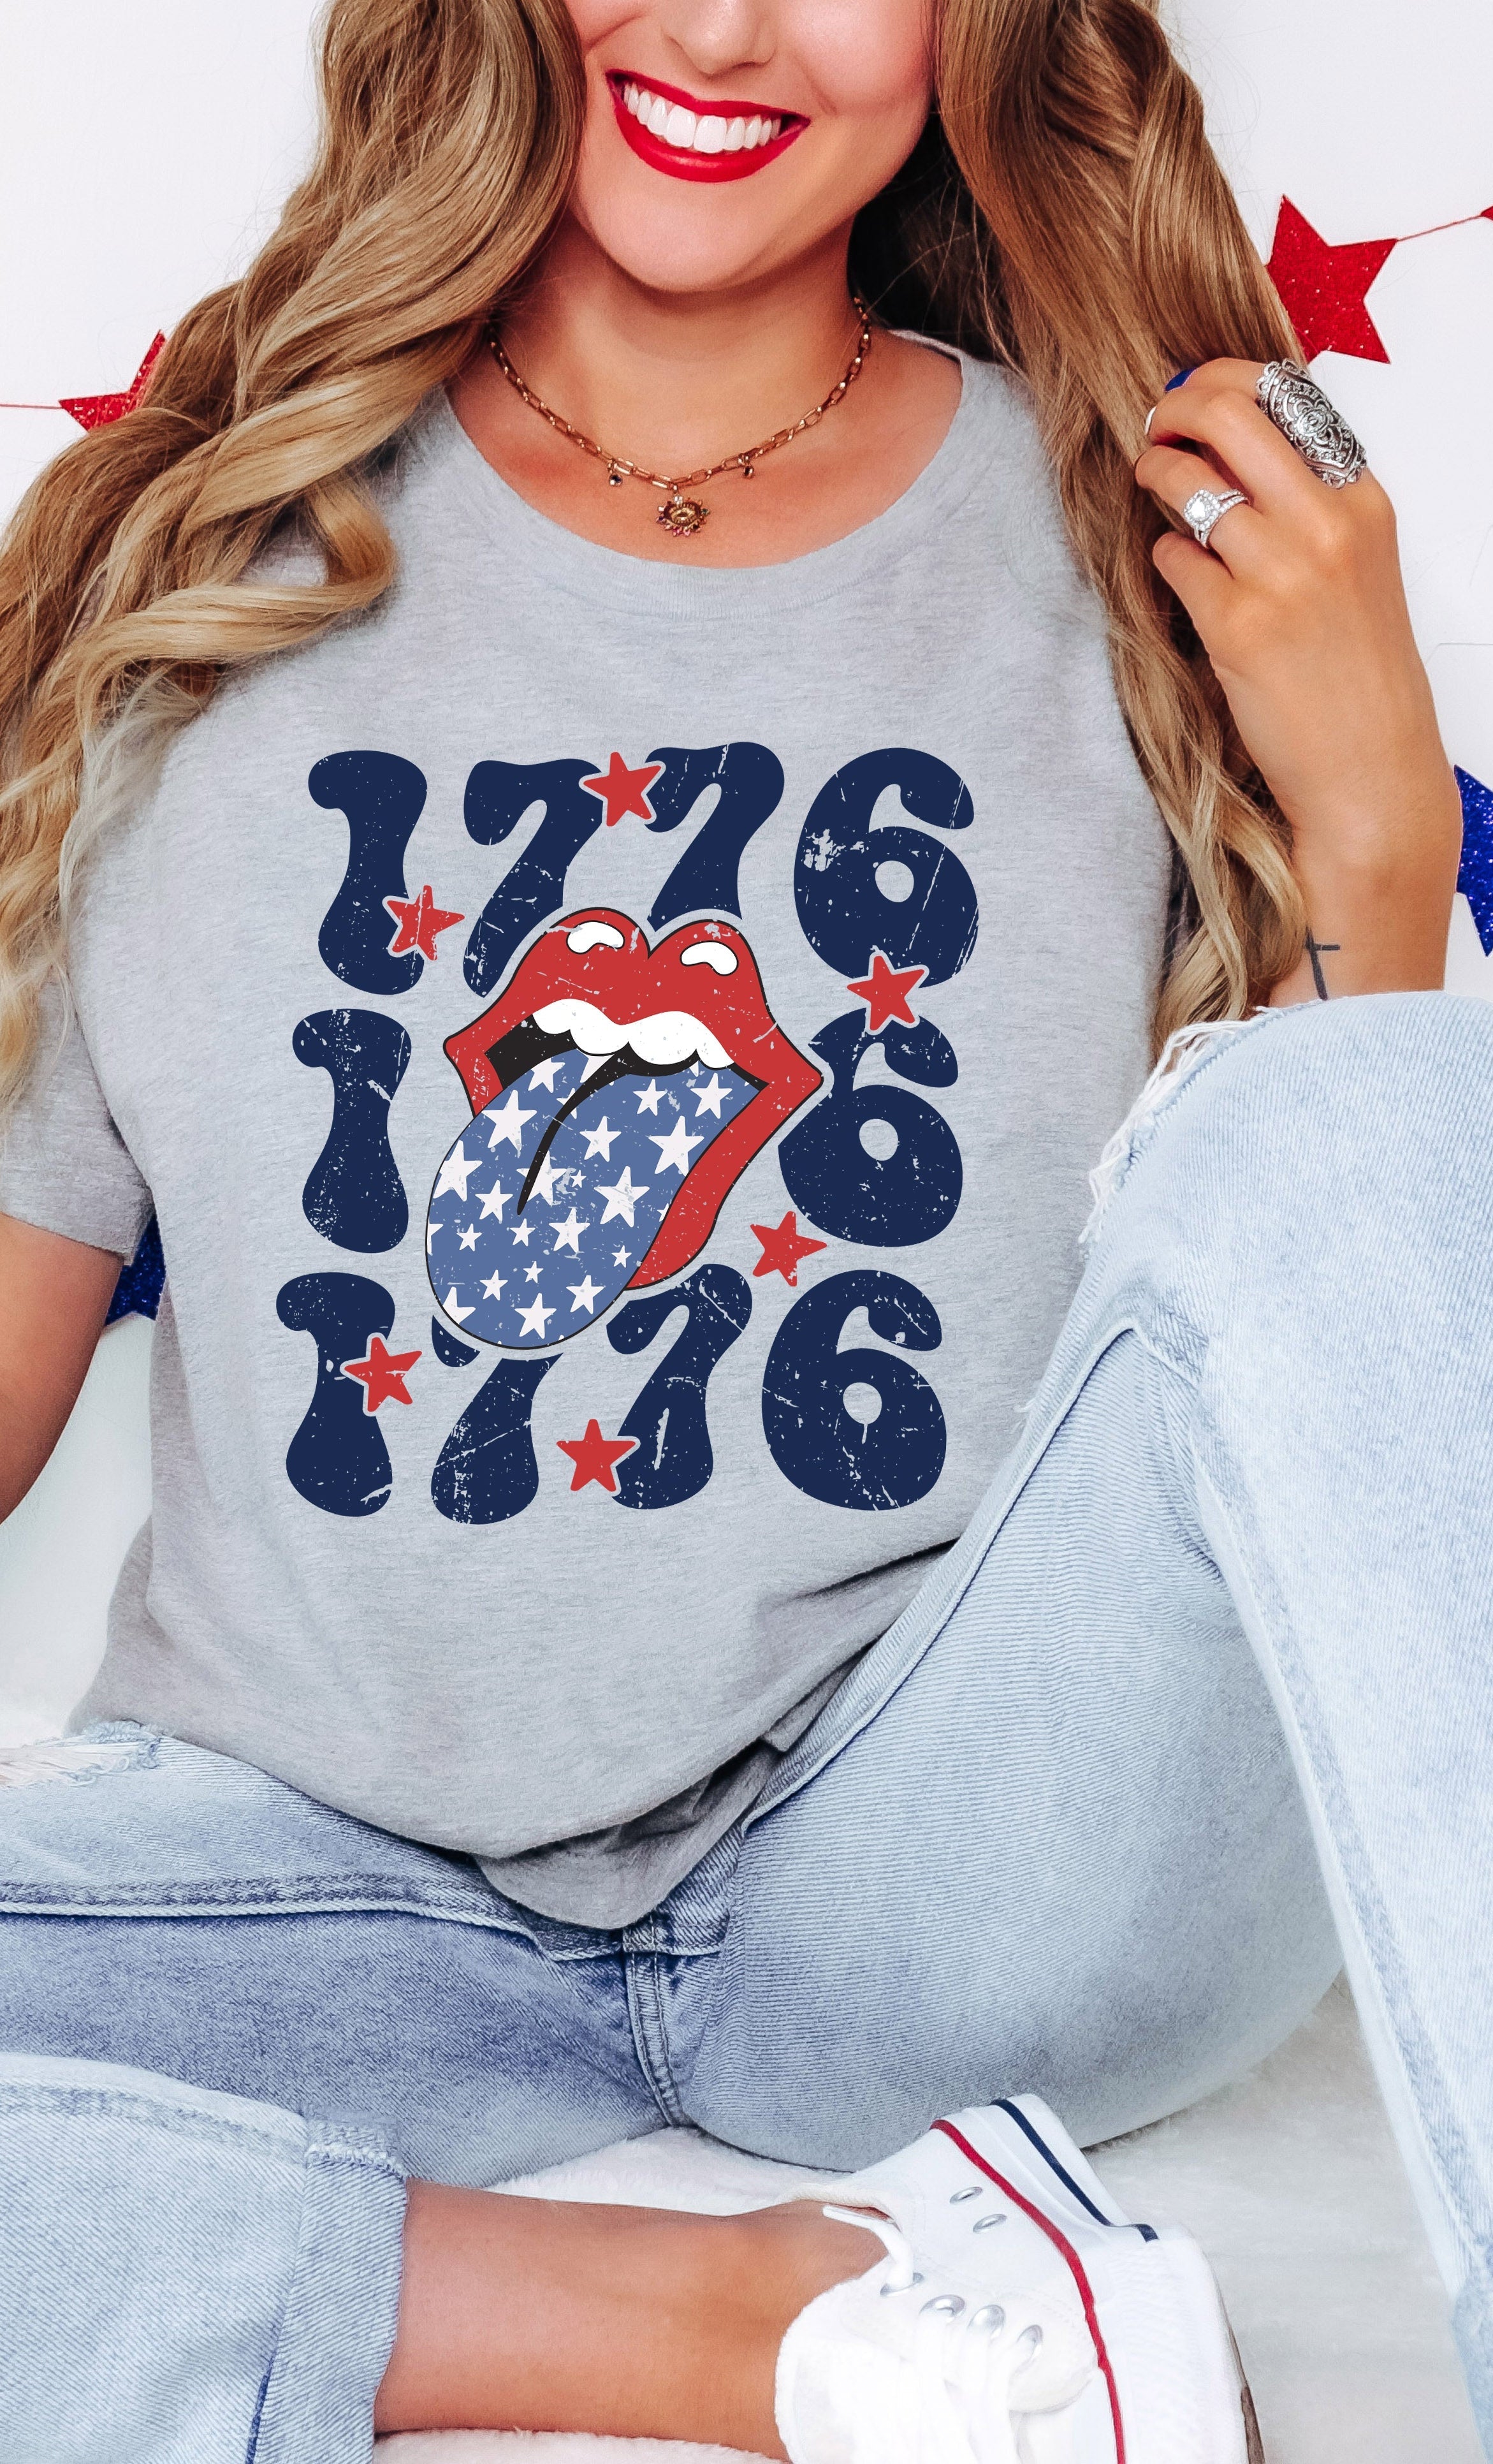 1776 Patriotic Lips | Short Sleeve Graphic Tee Olive and Ivory Retail